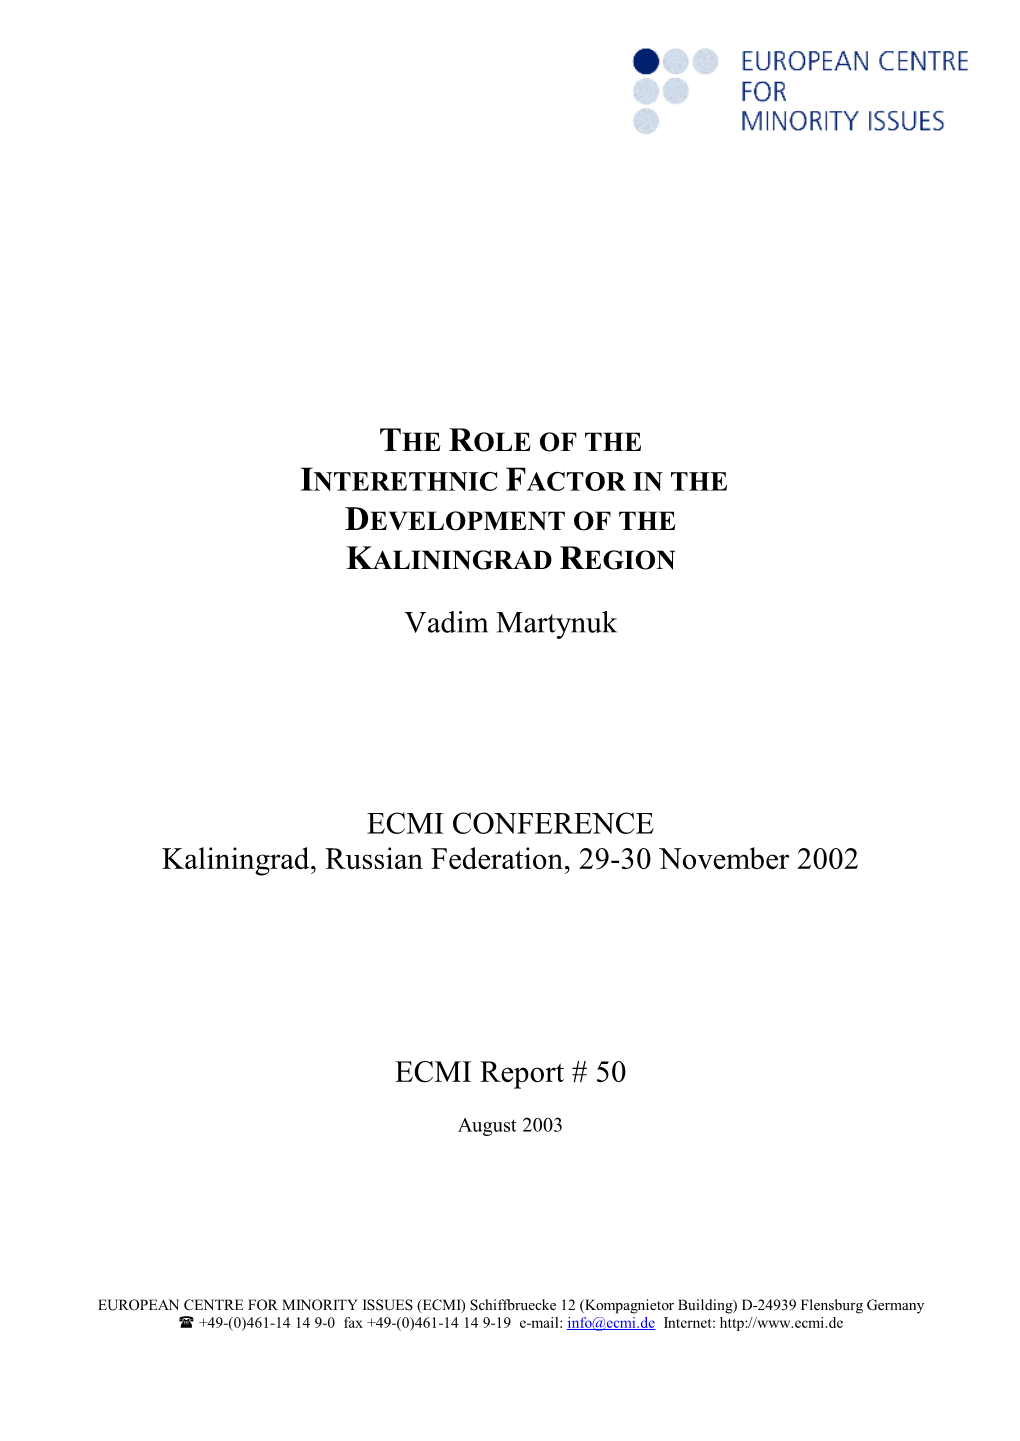 The Role of the Interethnic Factor in the Development of the Kaliningrad Region